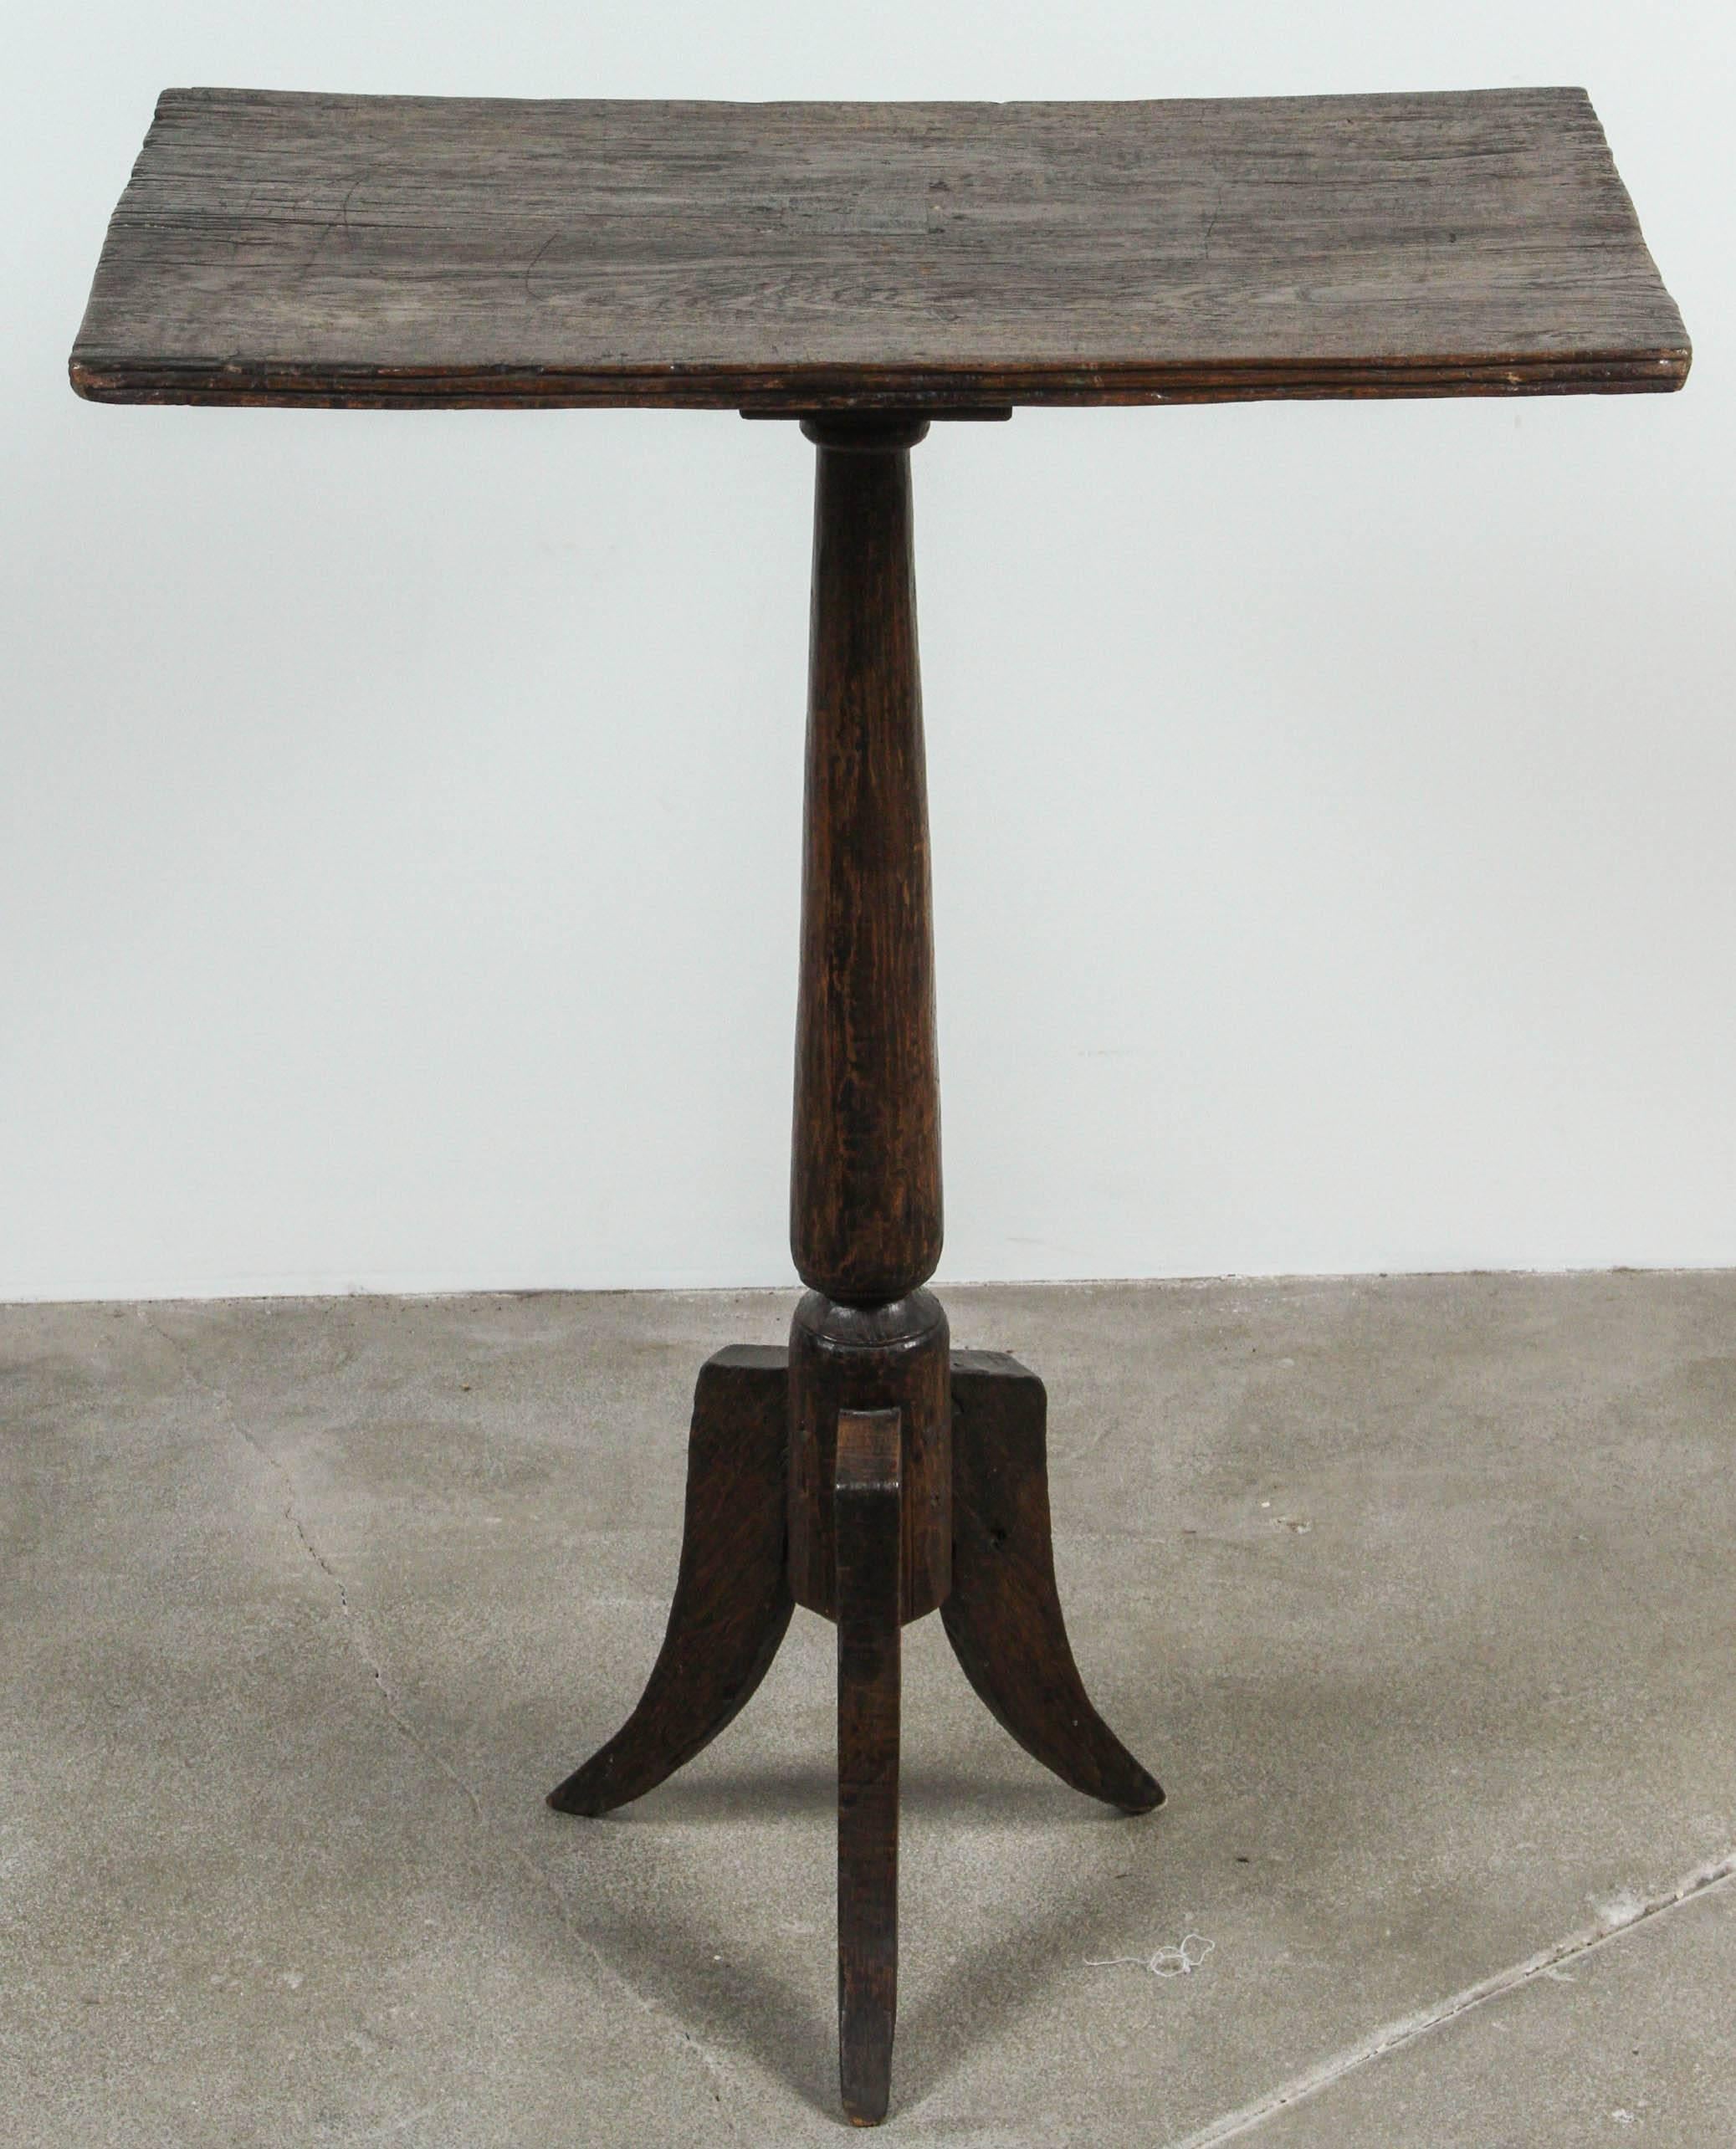 Dark stained Primitive pedestal side table with single pedestal and three splayed feet at base.